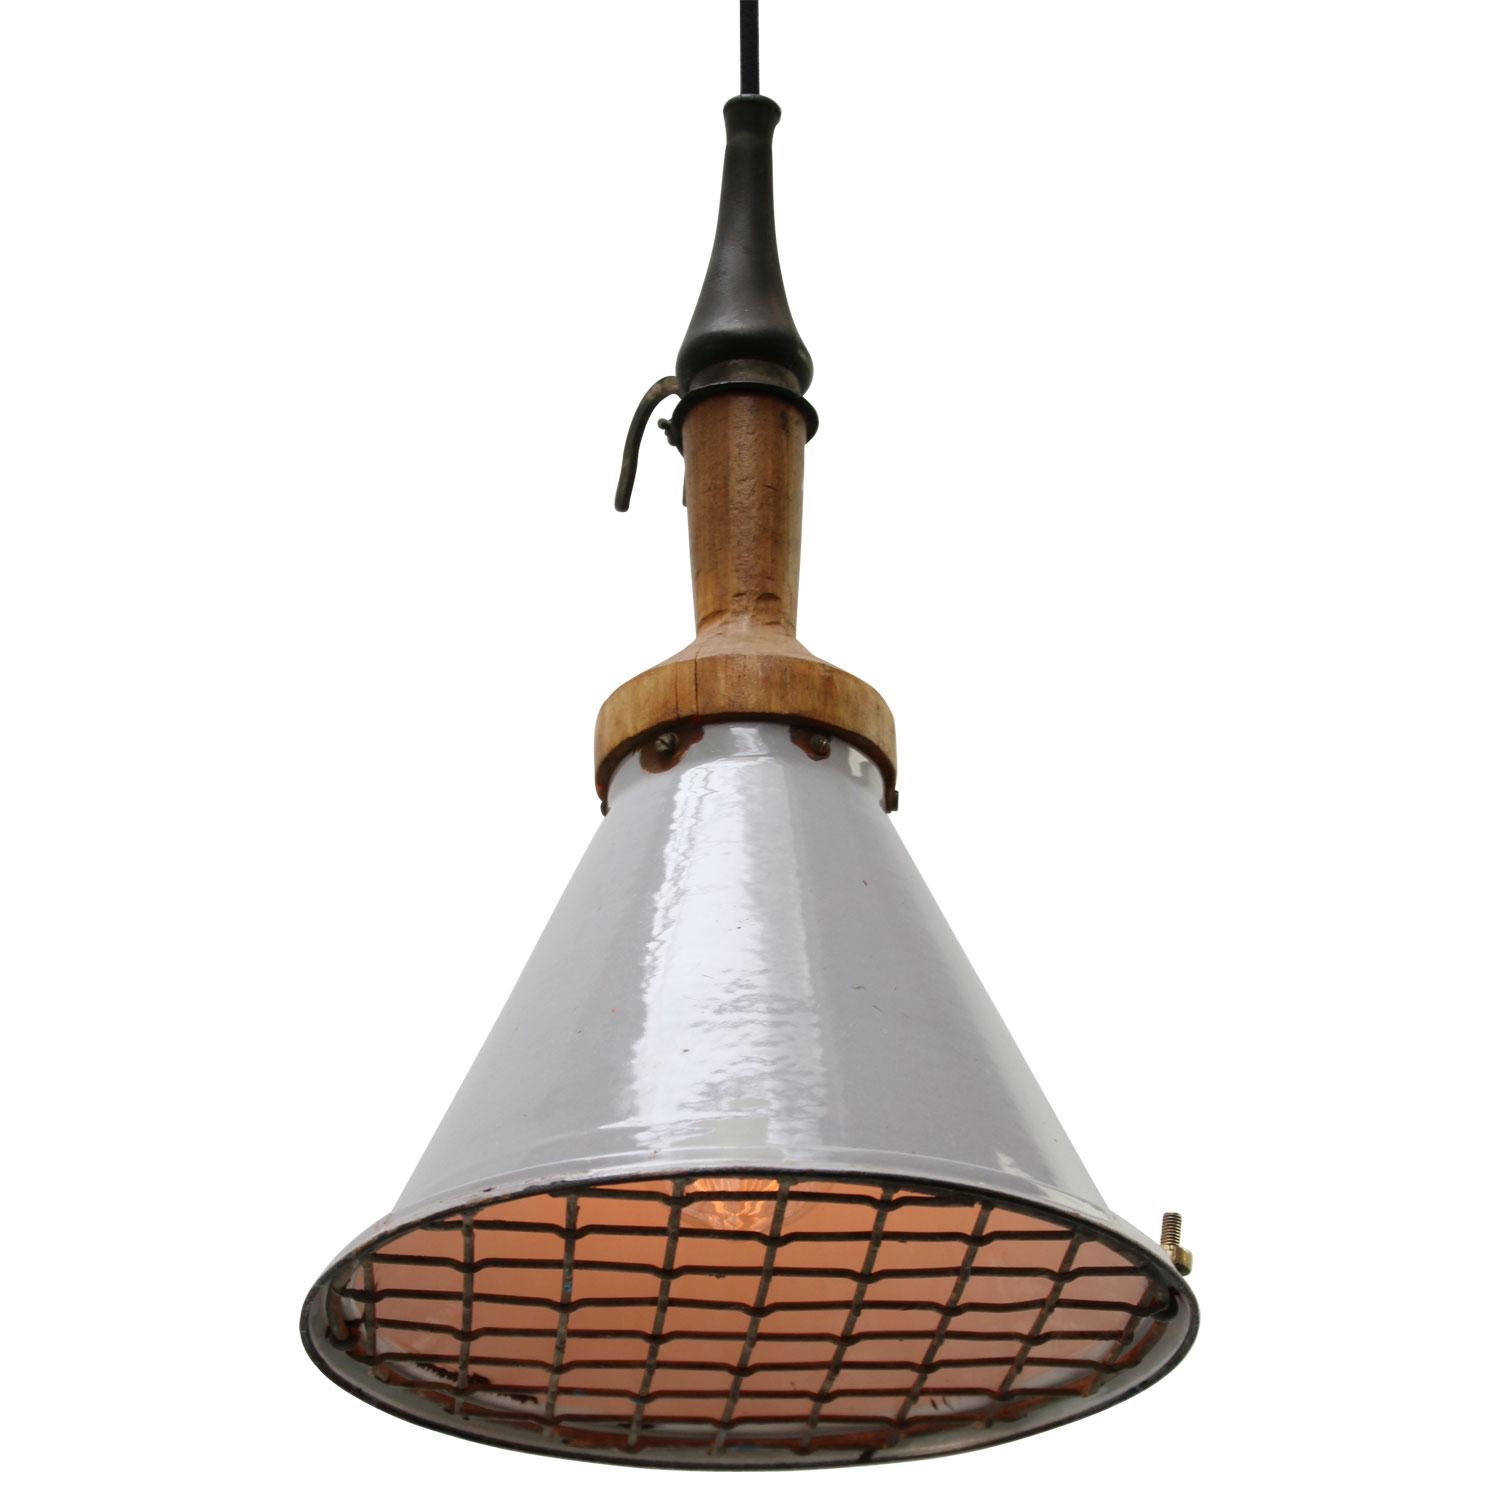 Work light by Industria Rotterdam.
Gray enamel shade with wooden handle
2 meter black cotton wire

Weight: 1.40 kg / 3.1 lb

Priced per individual item. All lamps have been made suitable by international standards for incandescent light bulbs,